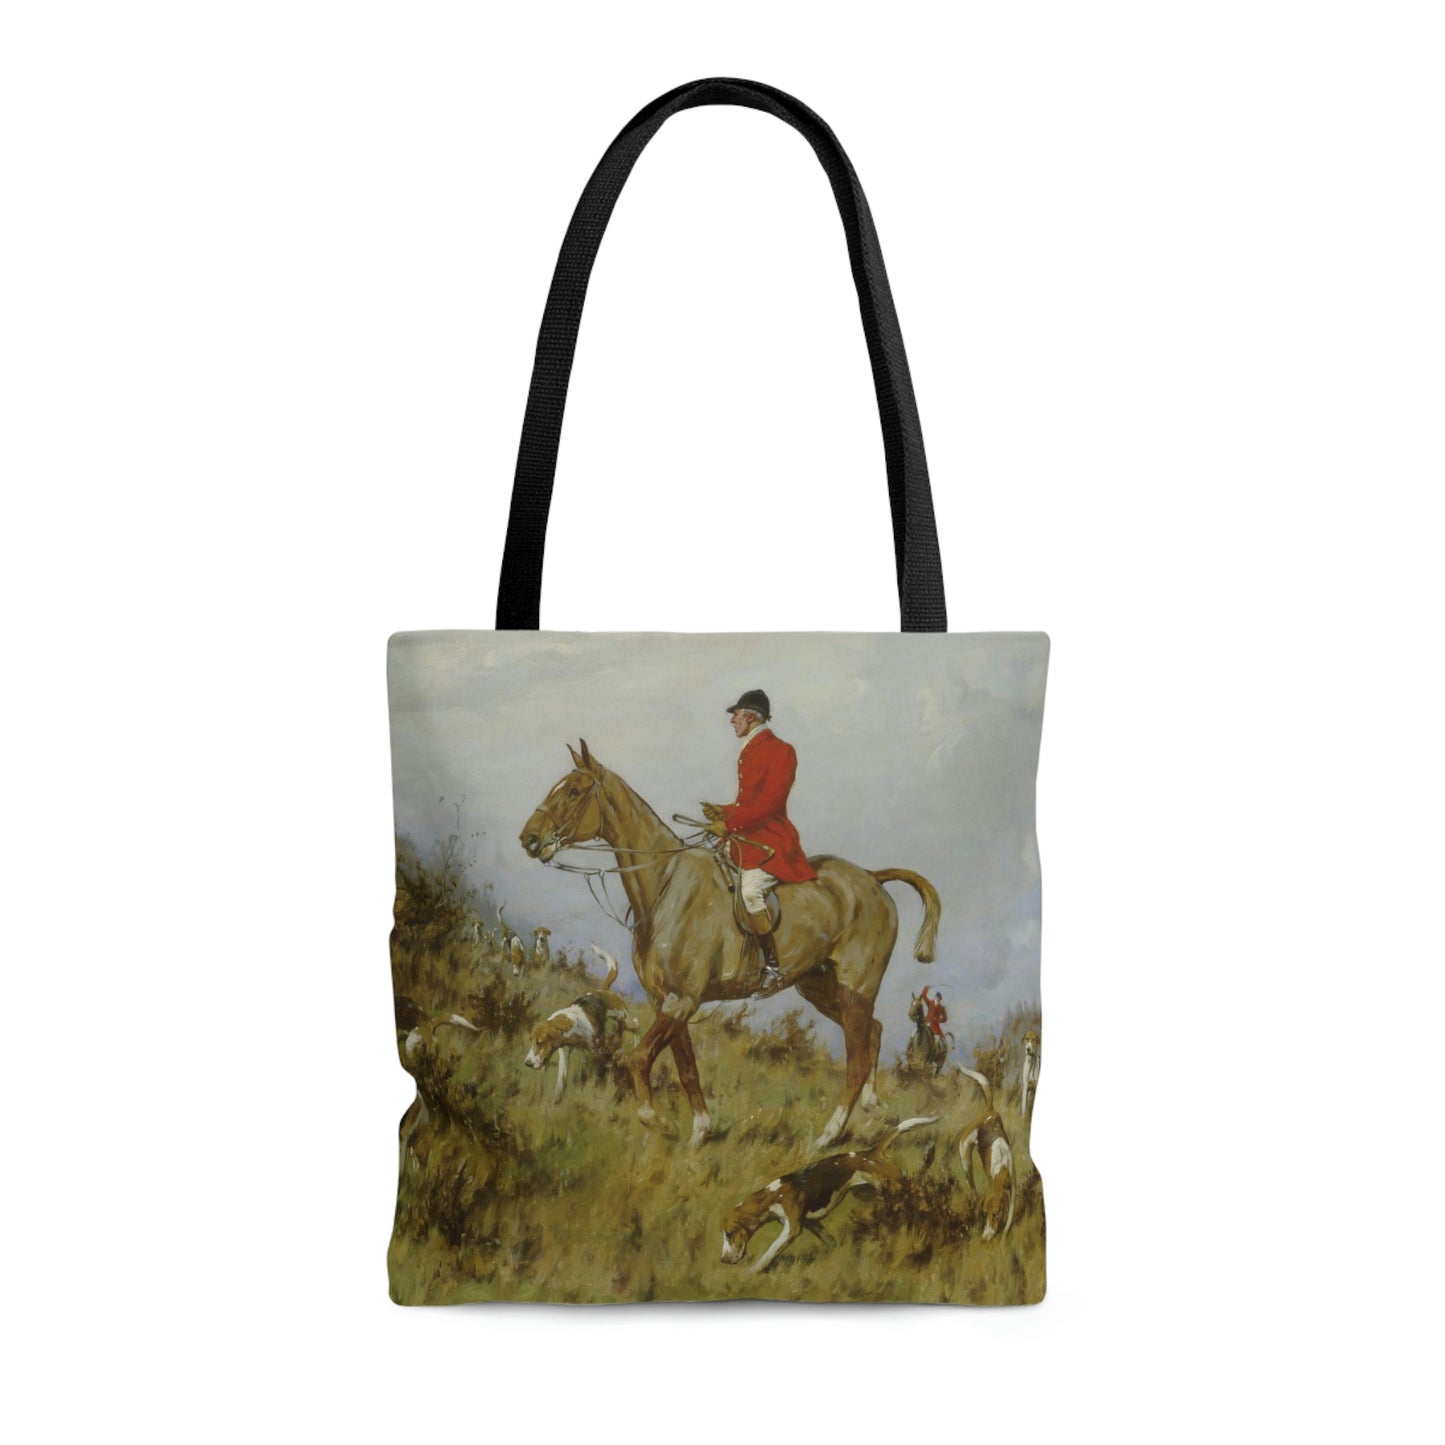 George Wright: "Drawing the Gorse" - AOP Tote Bag